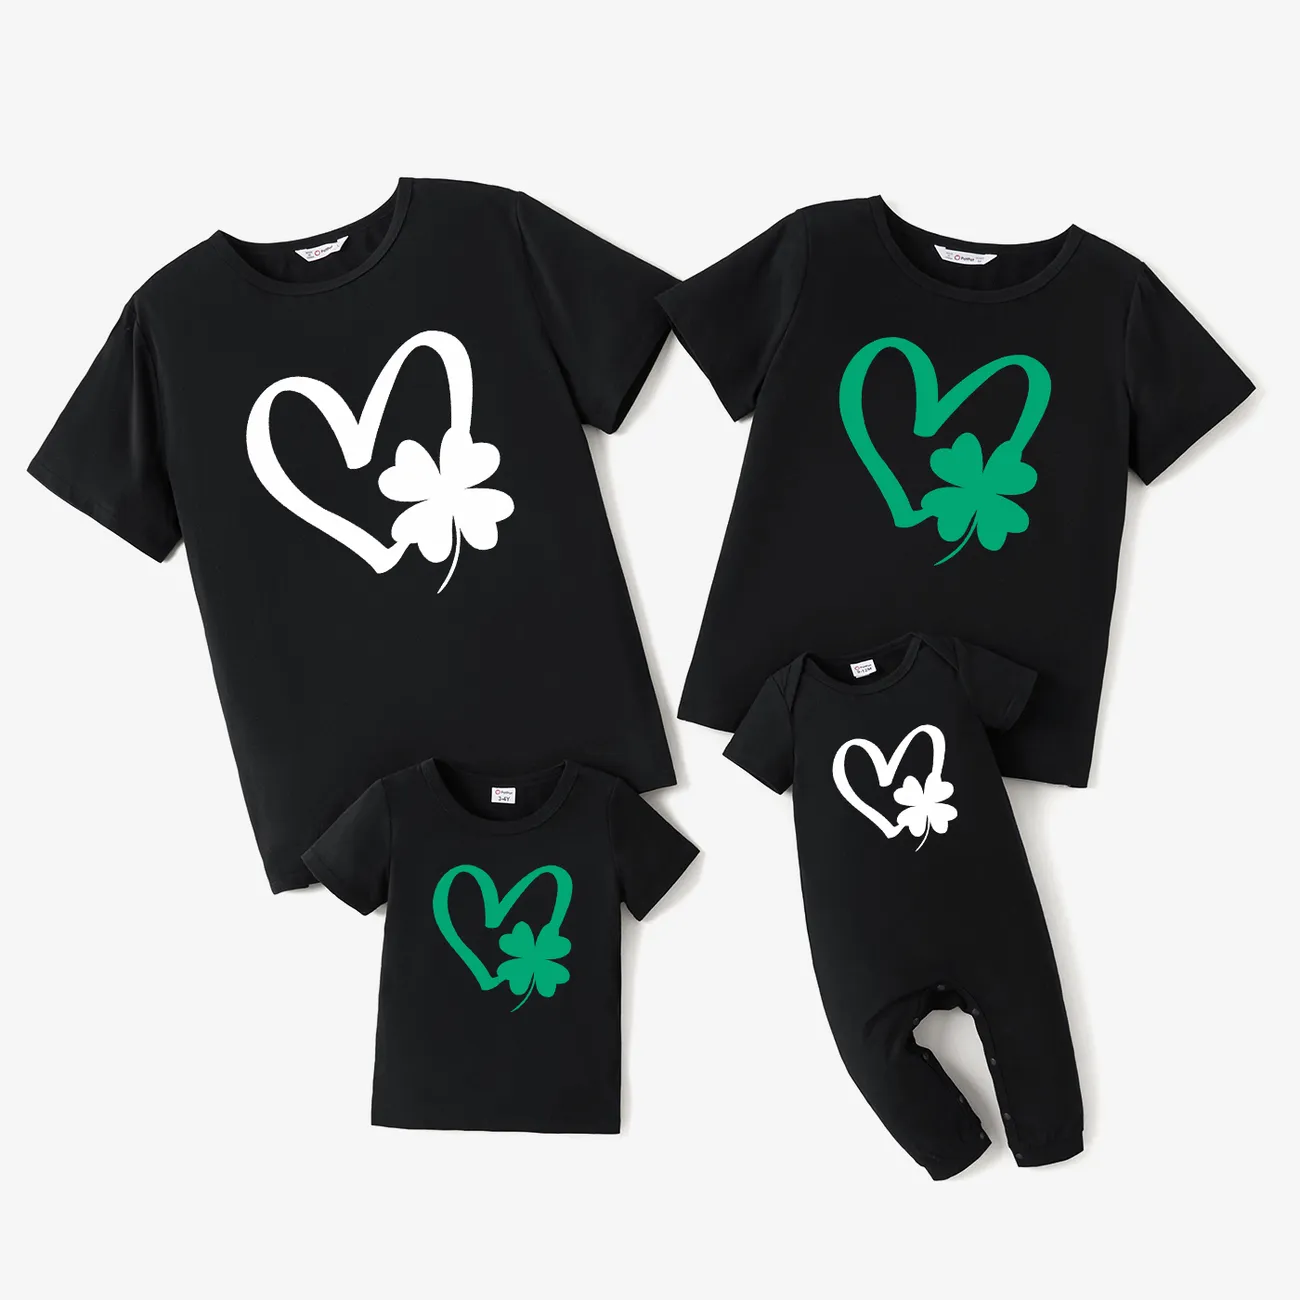 St. Patrick's Day Family Matching Heart and Four-Leaf Clover Pattern Black Tops Black big image 1